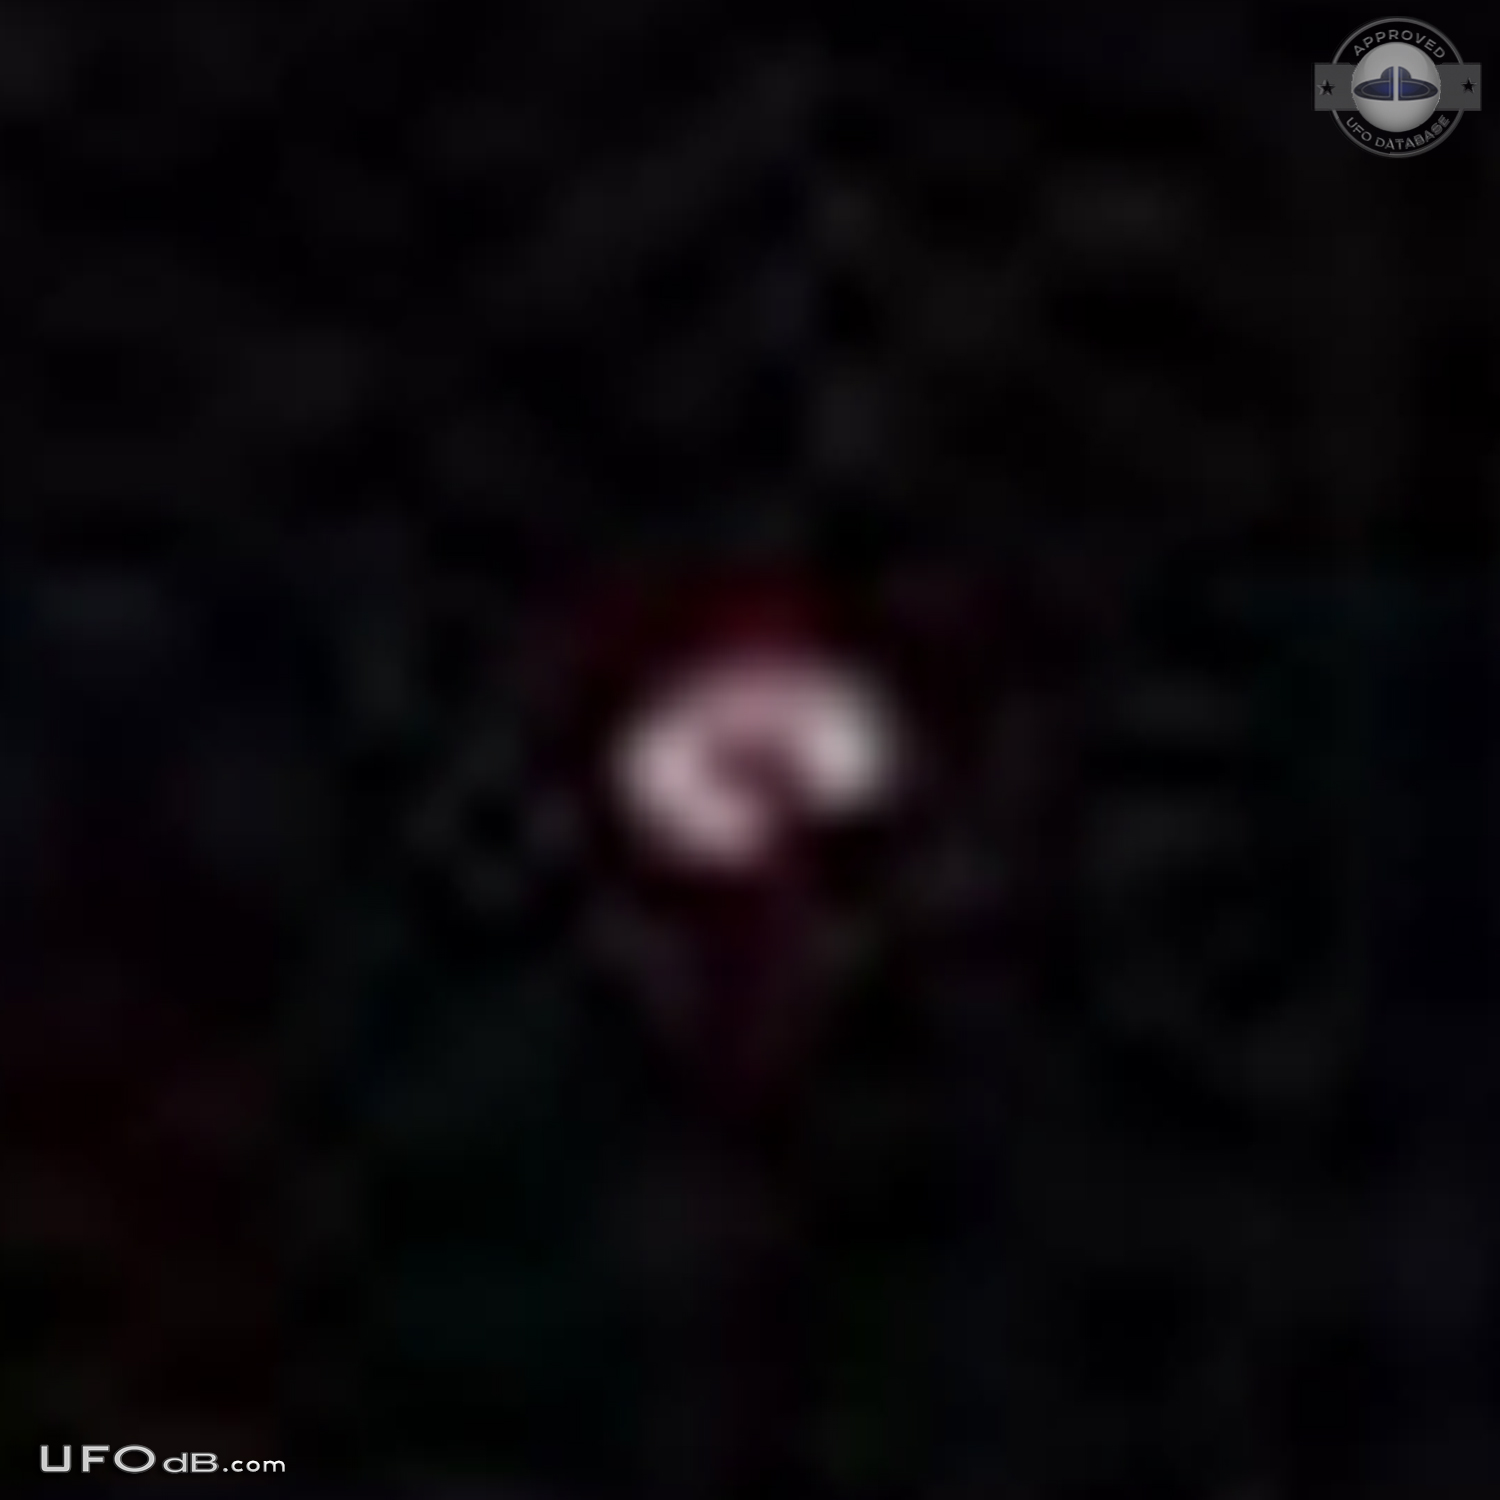 UFOs seen by several Marines over Camp Leatherneck, Afghanistan 2010 UFO Picture #490-4